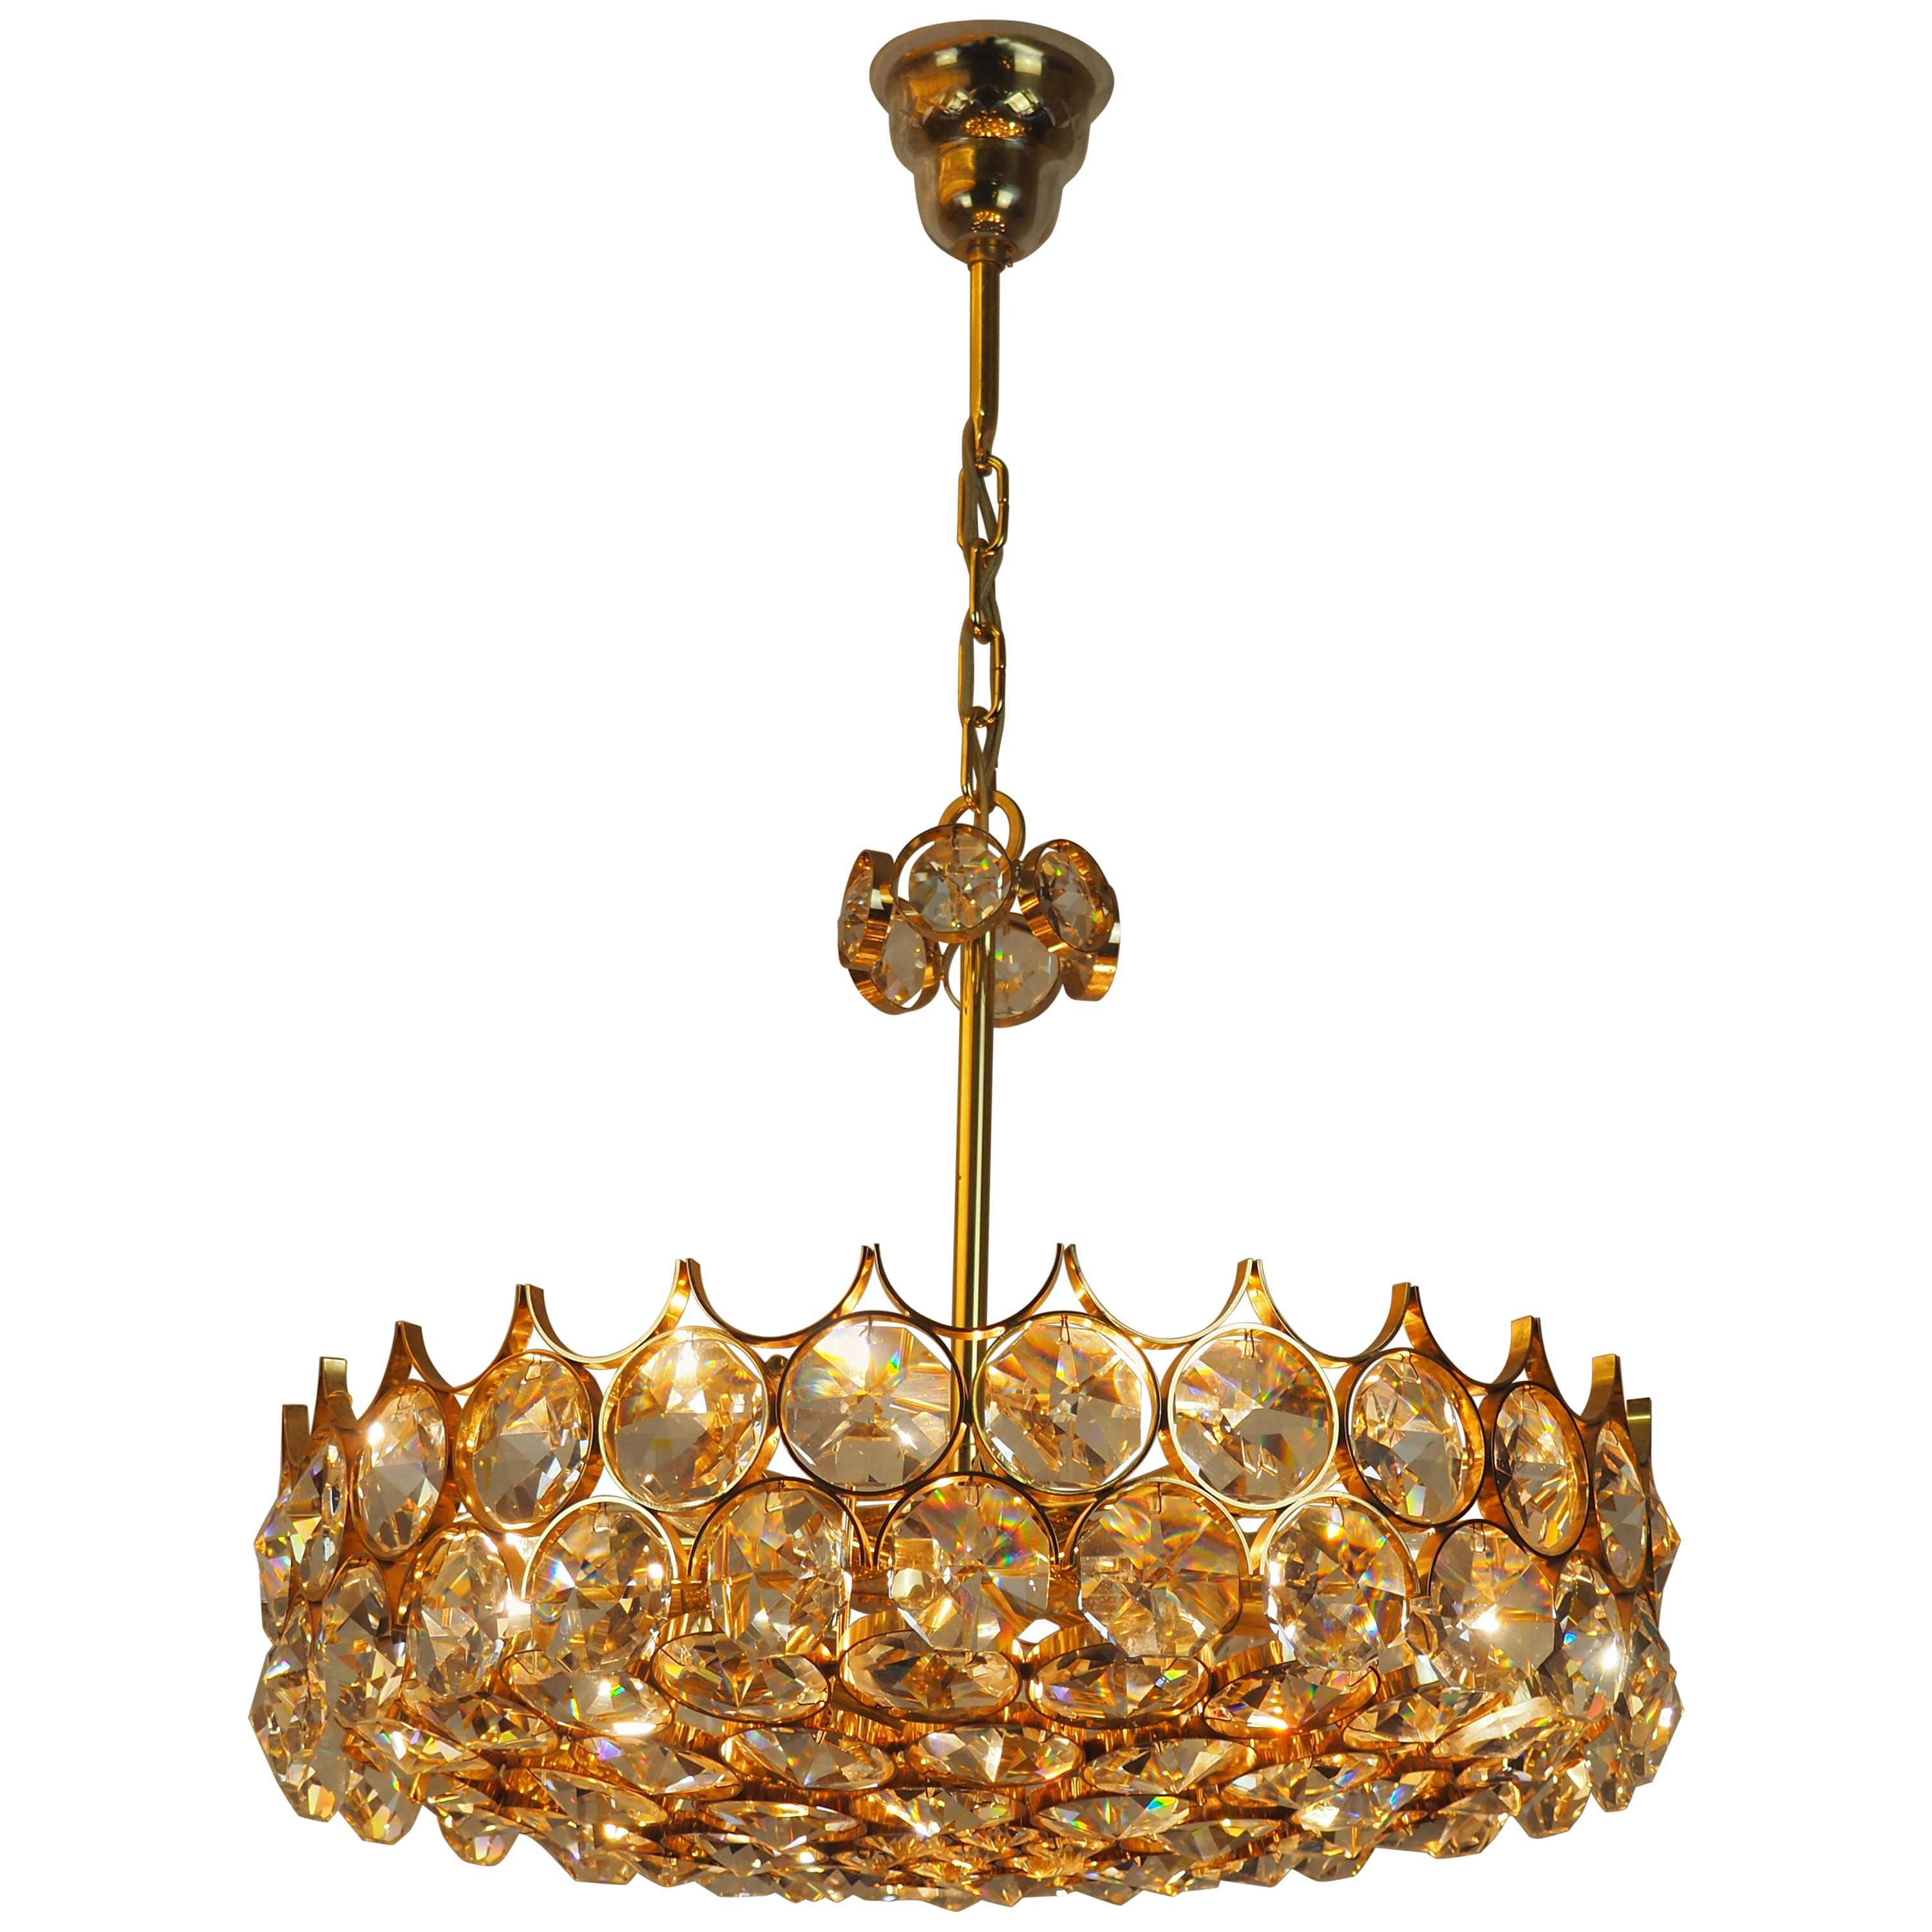 Lovely Large Gilt Brass and Crystal Chandelier by Palwa, circa 1970s For Sale